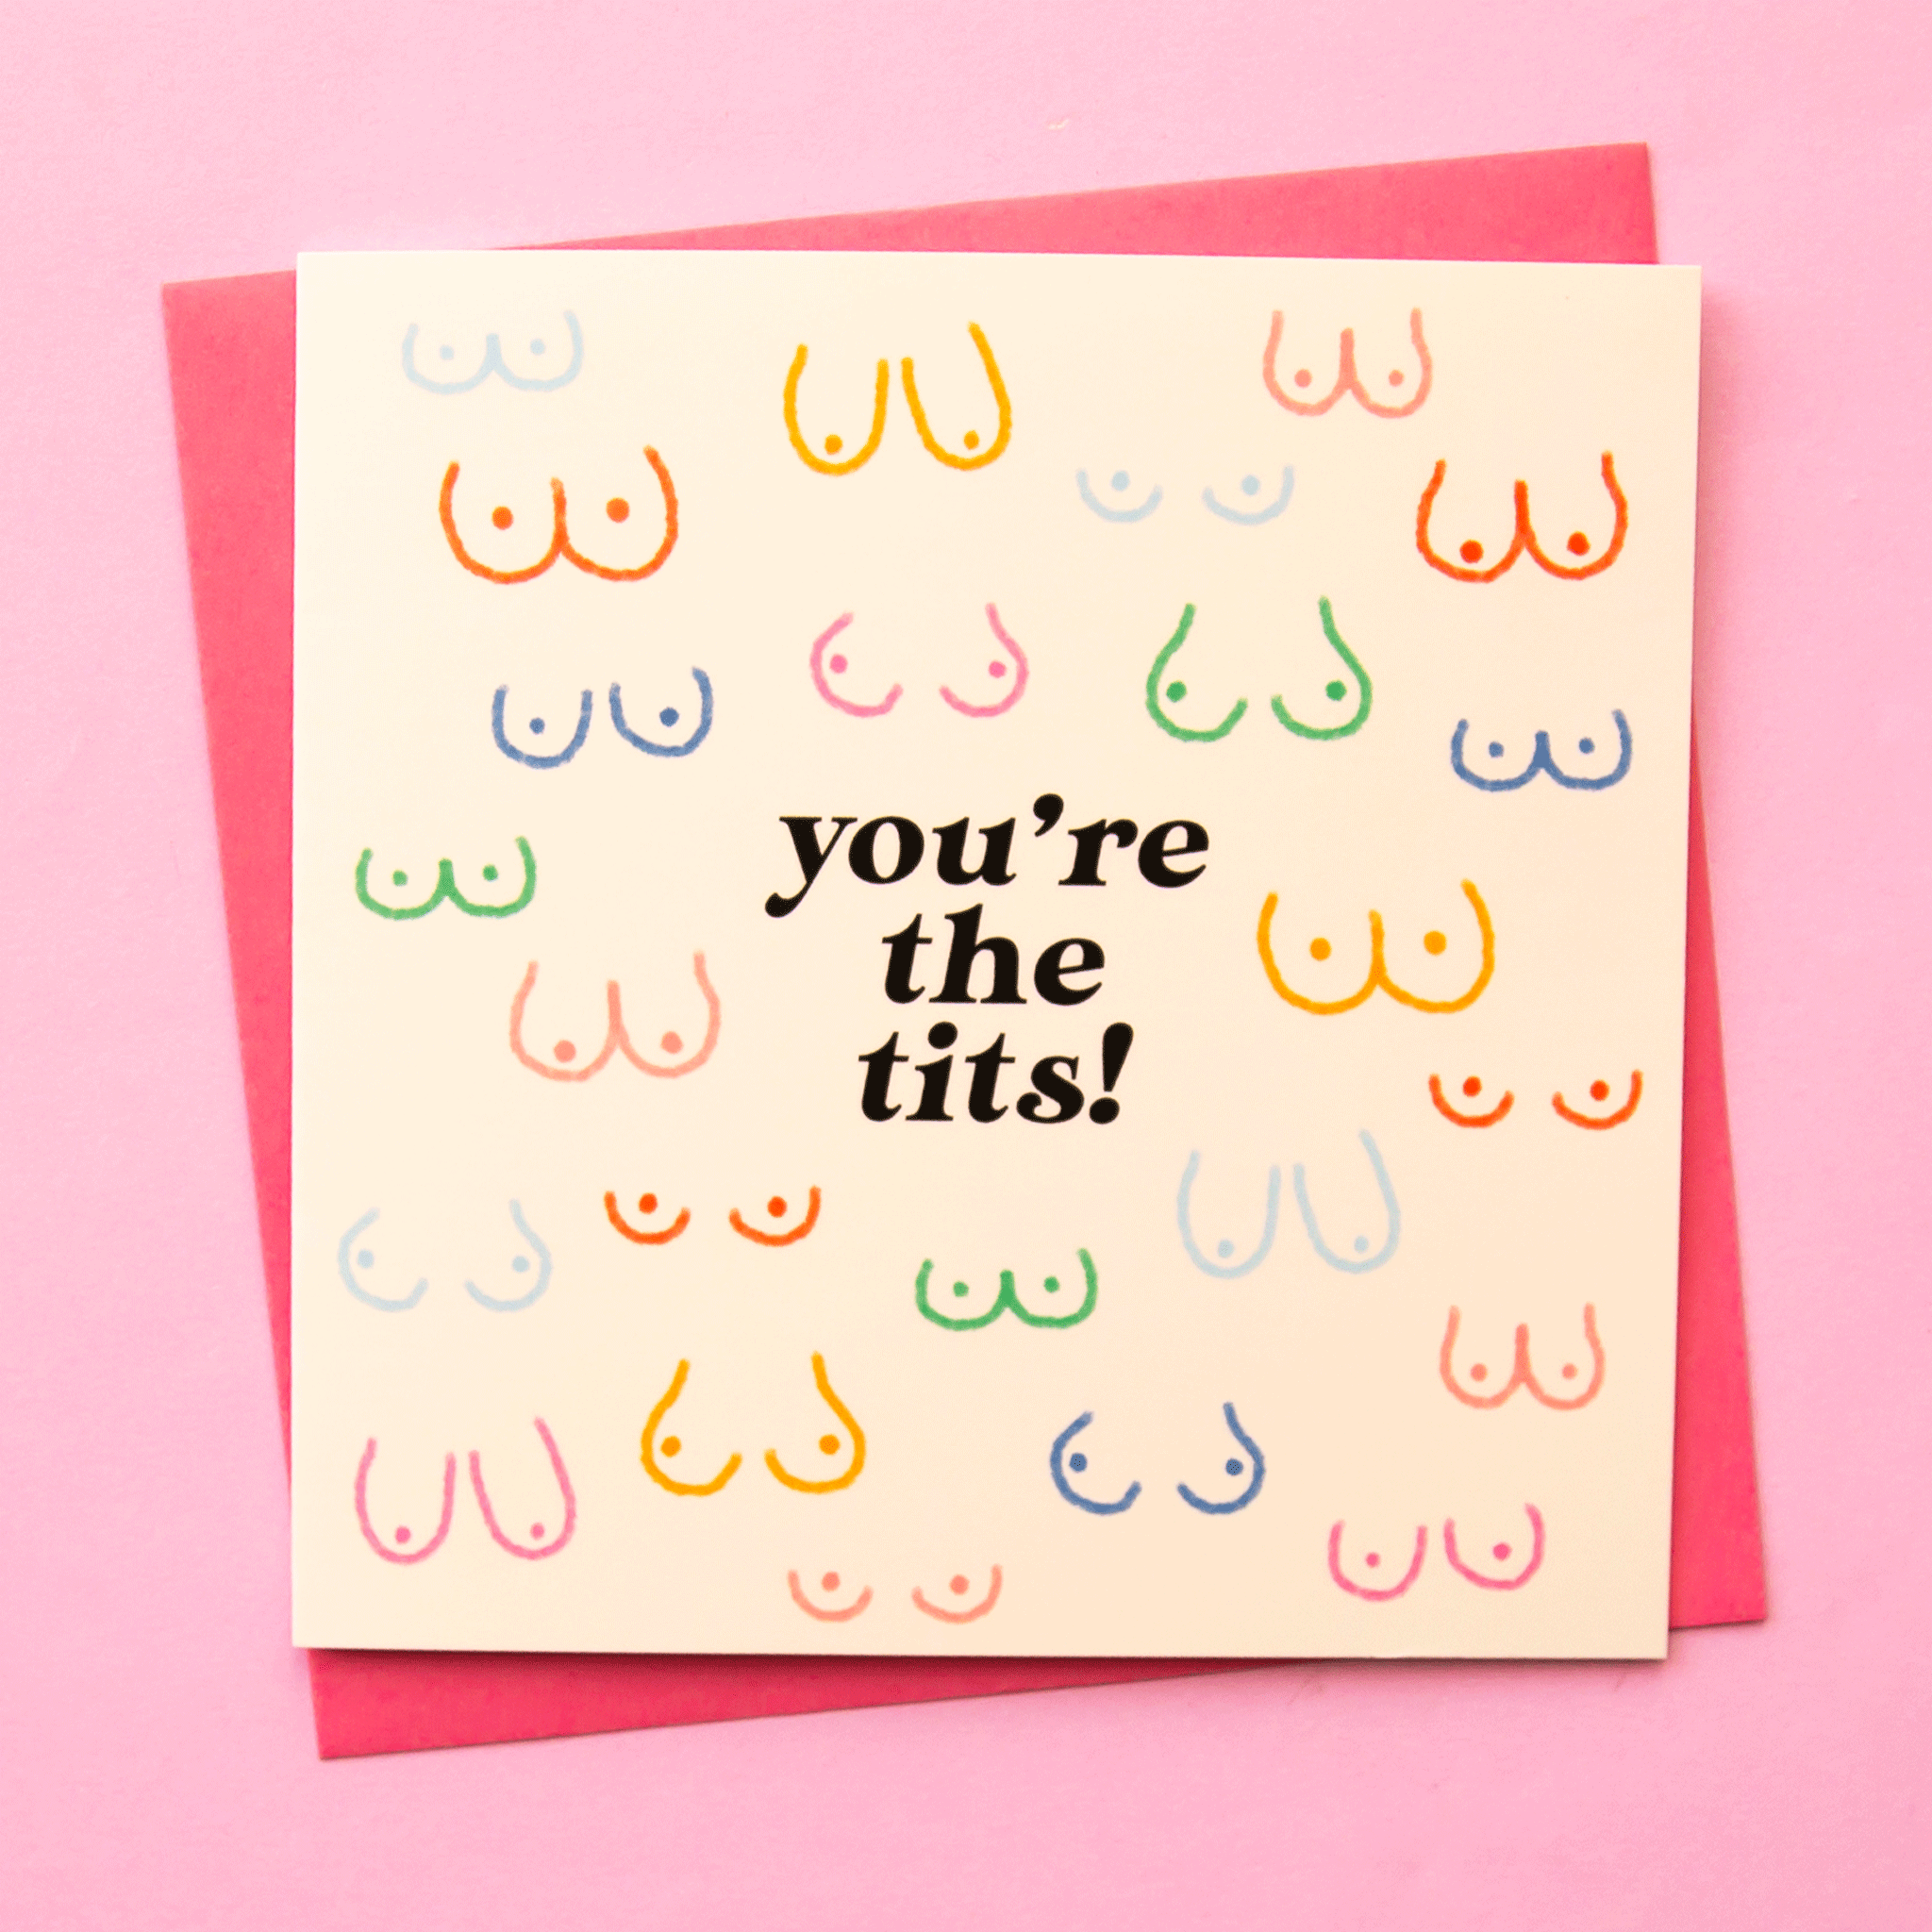 The text reads, "You're the tits!" on a white card with different colored breast illustrations that vary in all different sizes and shapes. The colors include light blue, dark blue, green, mustard, red and pink! A pink envelope is also shown and included with purchase.